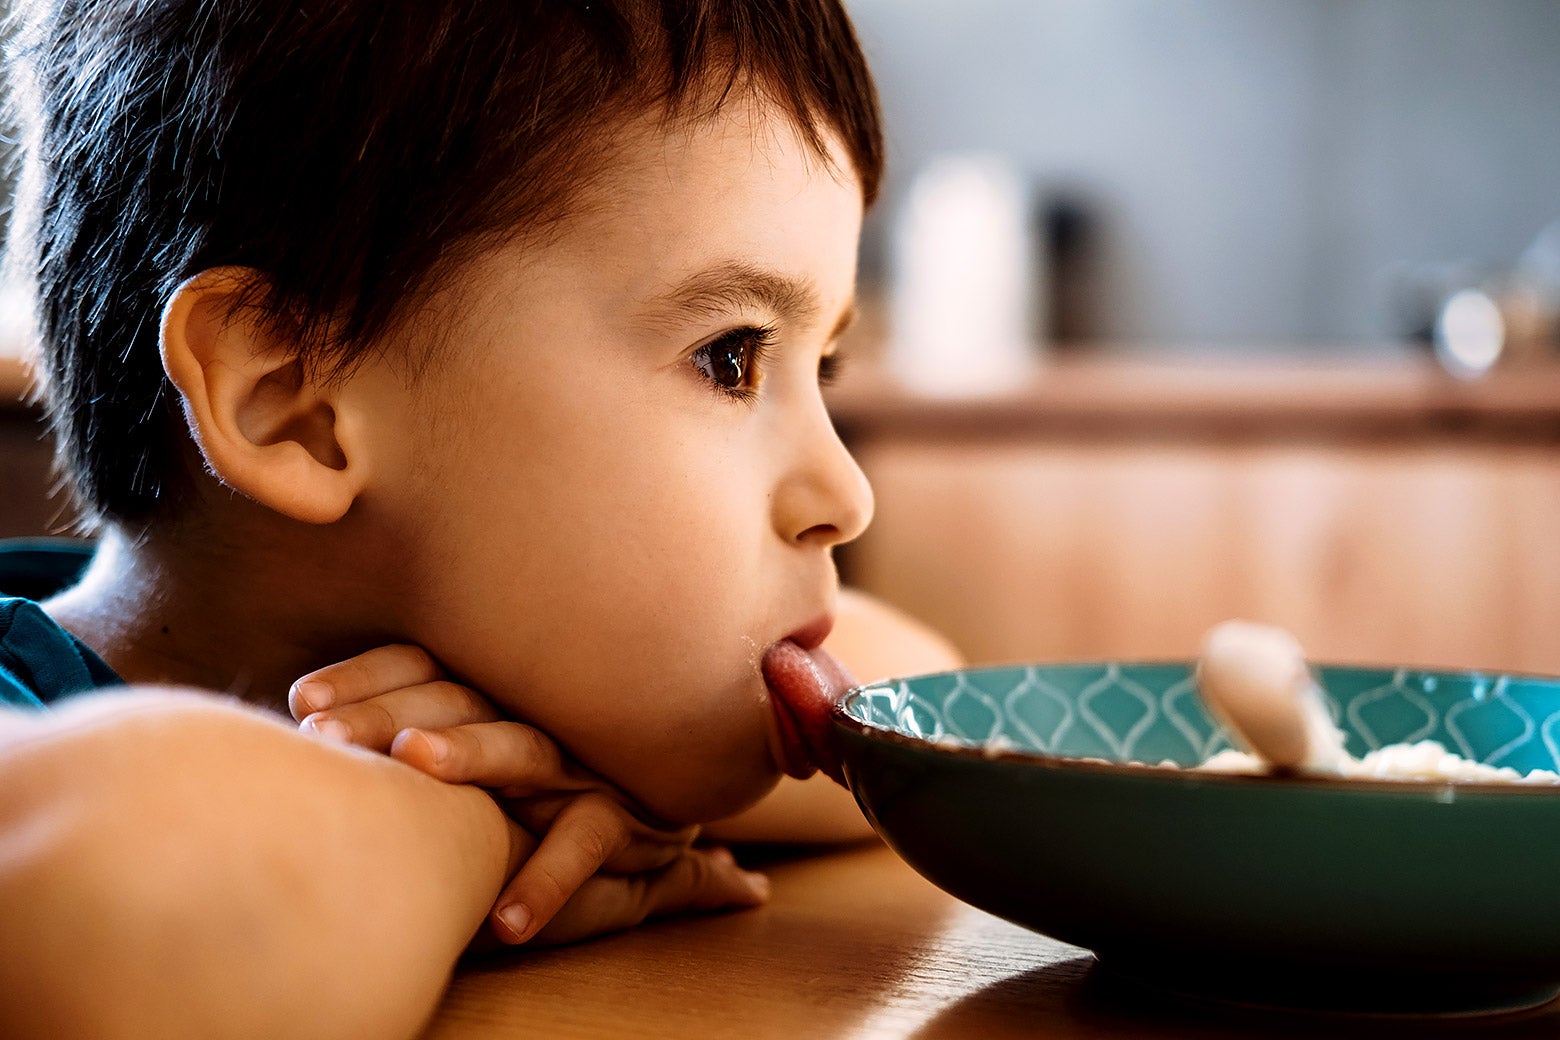 A child sits next to a bowl of food.